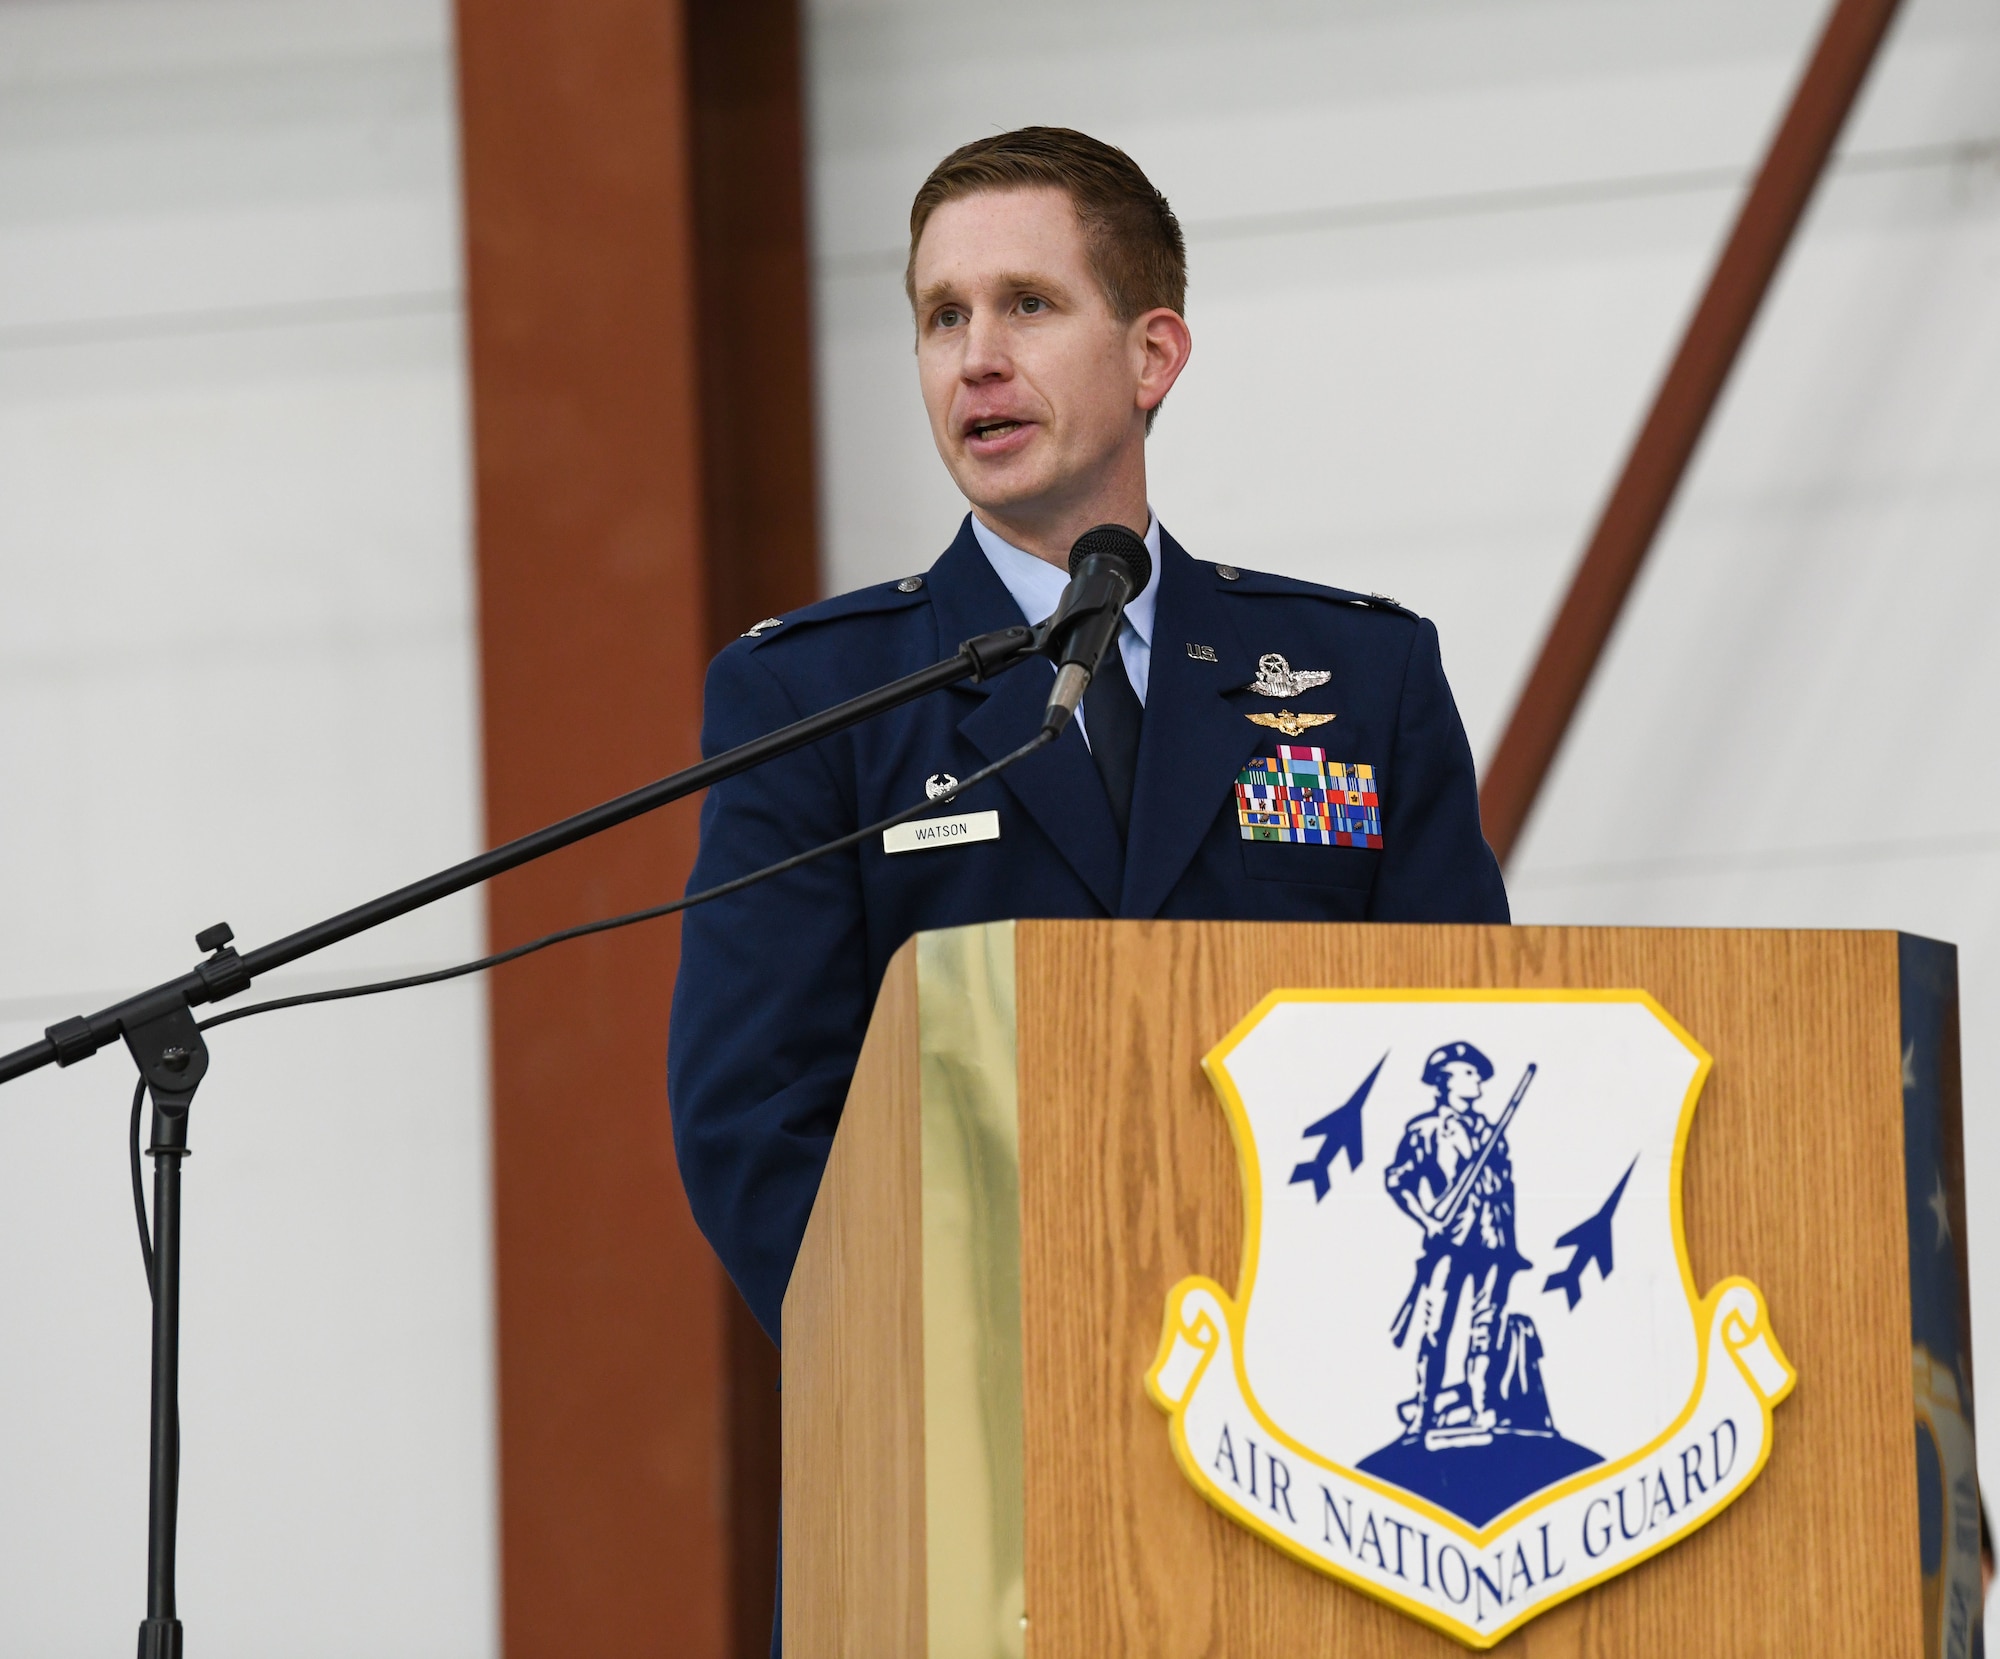 Col. Britt A. Watson, the incoming commander of the 172nd Airlift Wing, speaks at the change of command ceremony for the 172nd Airlift Wing at Thompson Field, Jackson, Mississippi, Feb. 6, 2022.